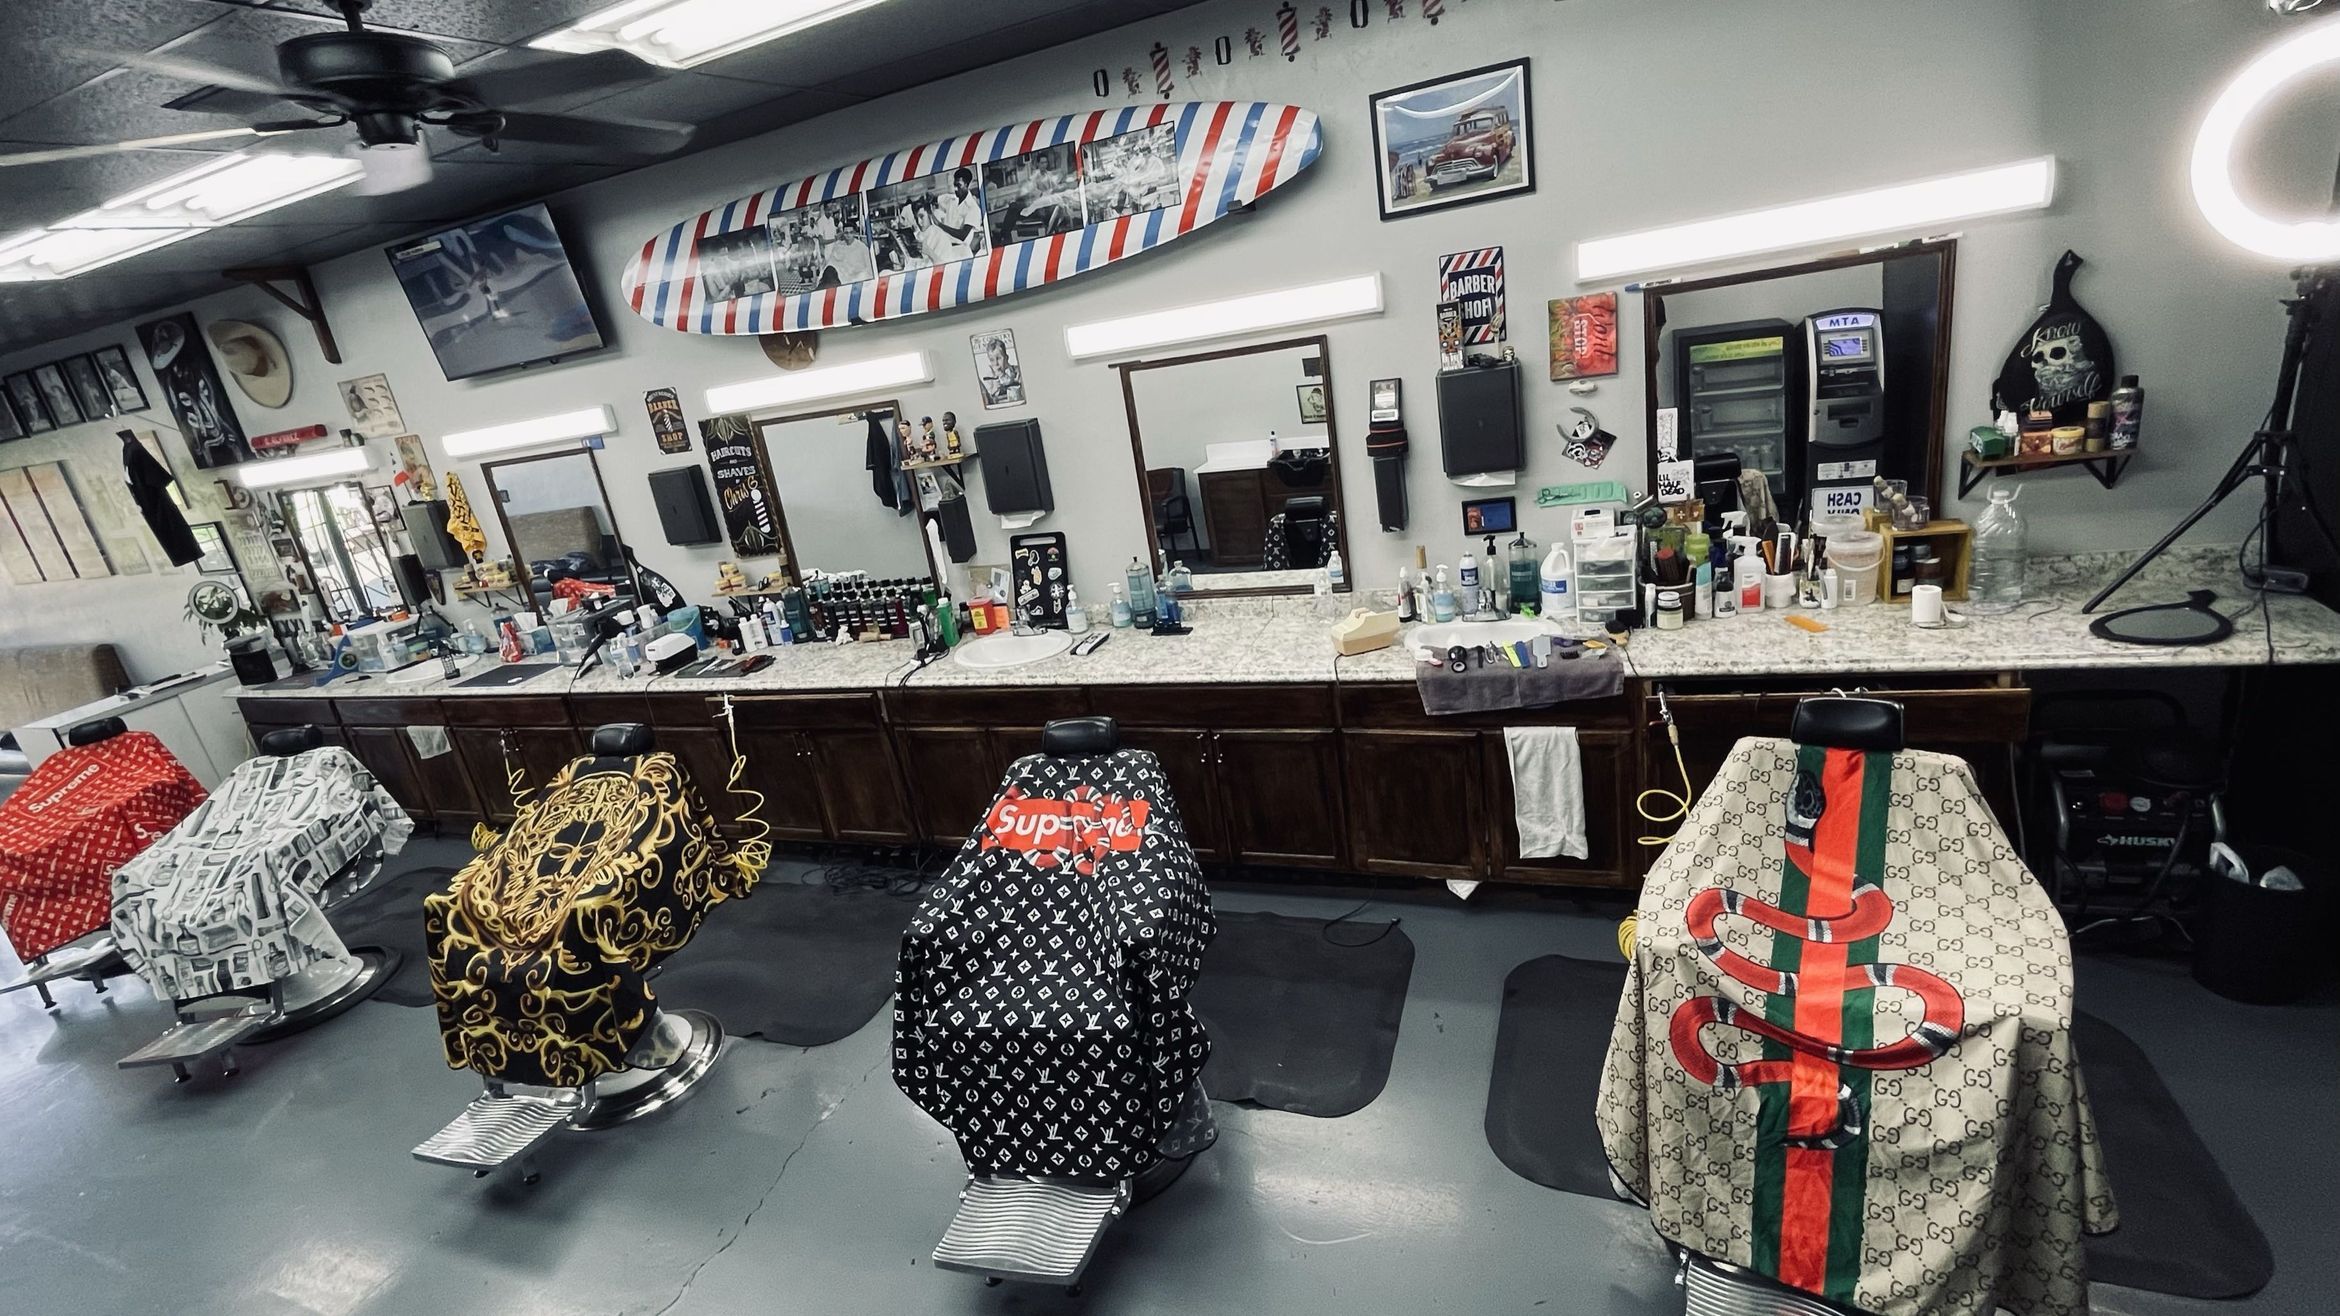 Gerardo's Classic Barber Shop, 3869 Spring Mountain Rd, Las Vegas, NV.  While the pricing sign is in Engl…